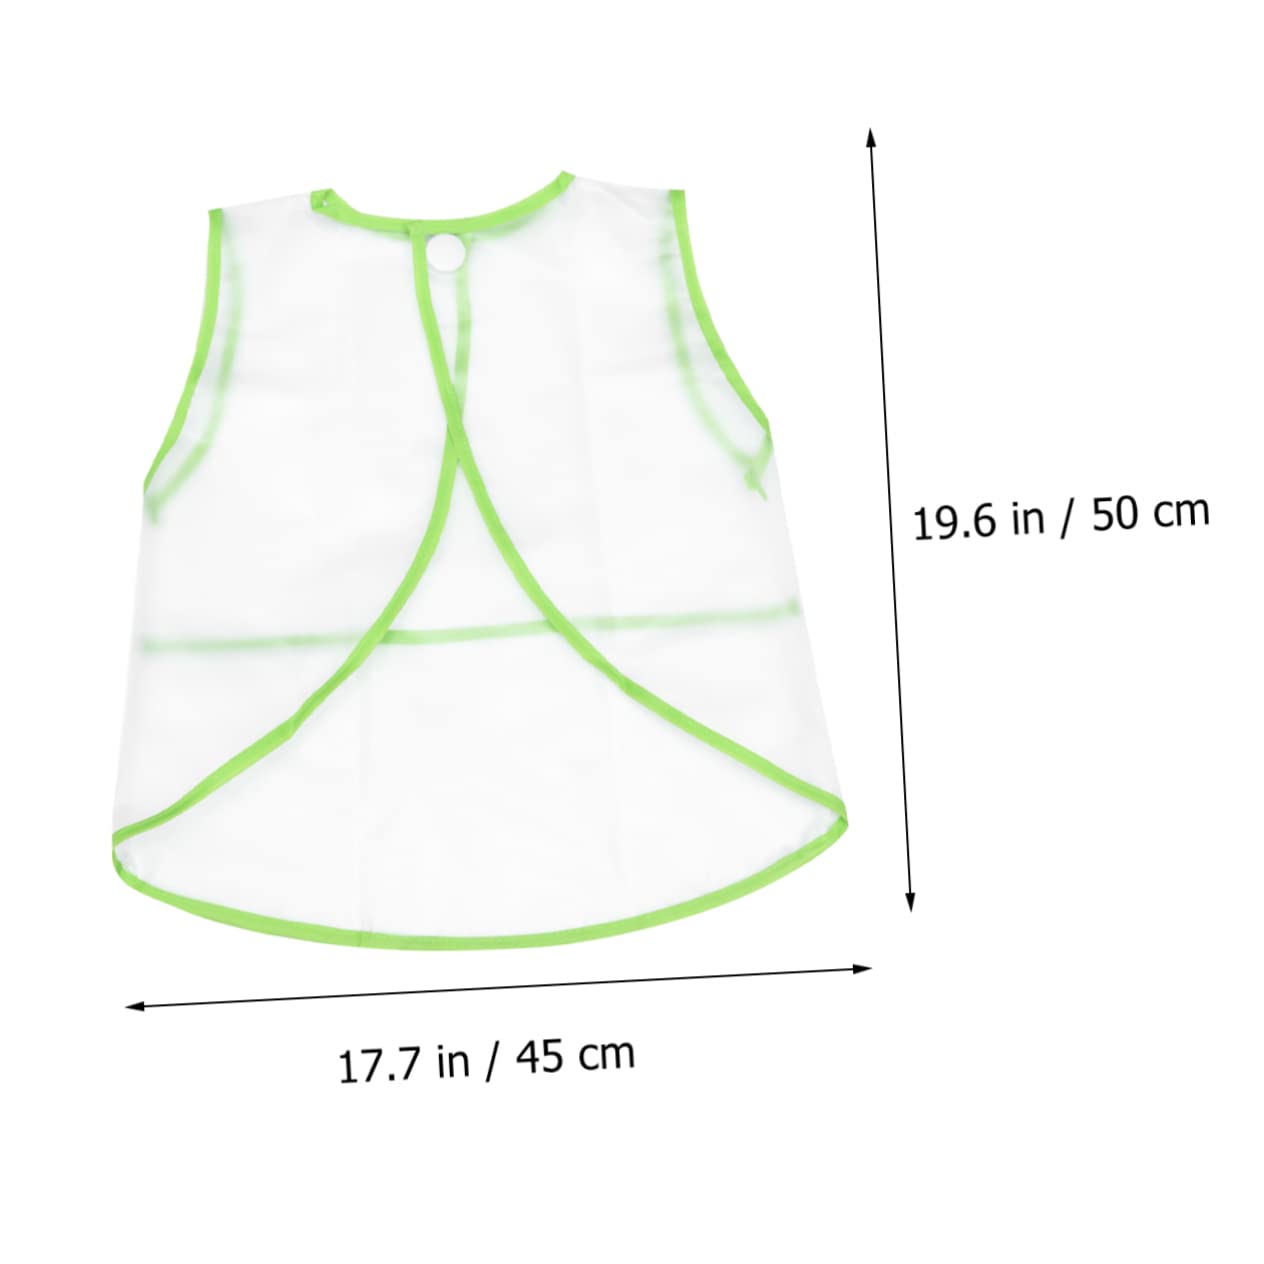 ERINGOGO 1pc Painting Apron Toddler Paint Water Proof Apron Sleeve Apron Artist Smock Kids Painting Coat Cover Drawing Smock Painting Smock Kid Art Smock Work Clothes Baby Gown Sleeveless